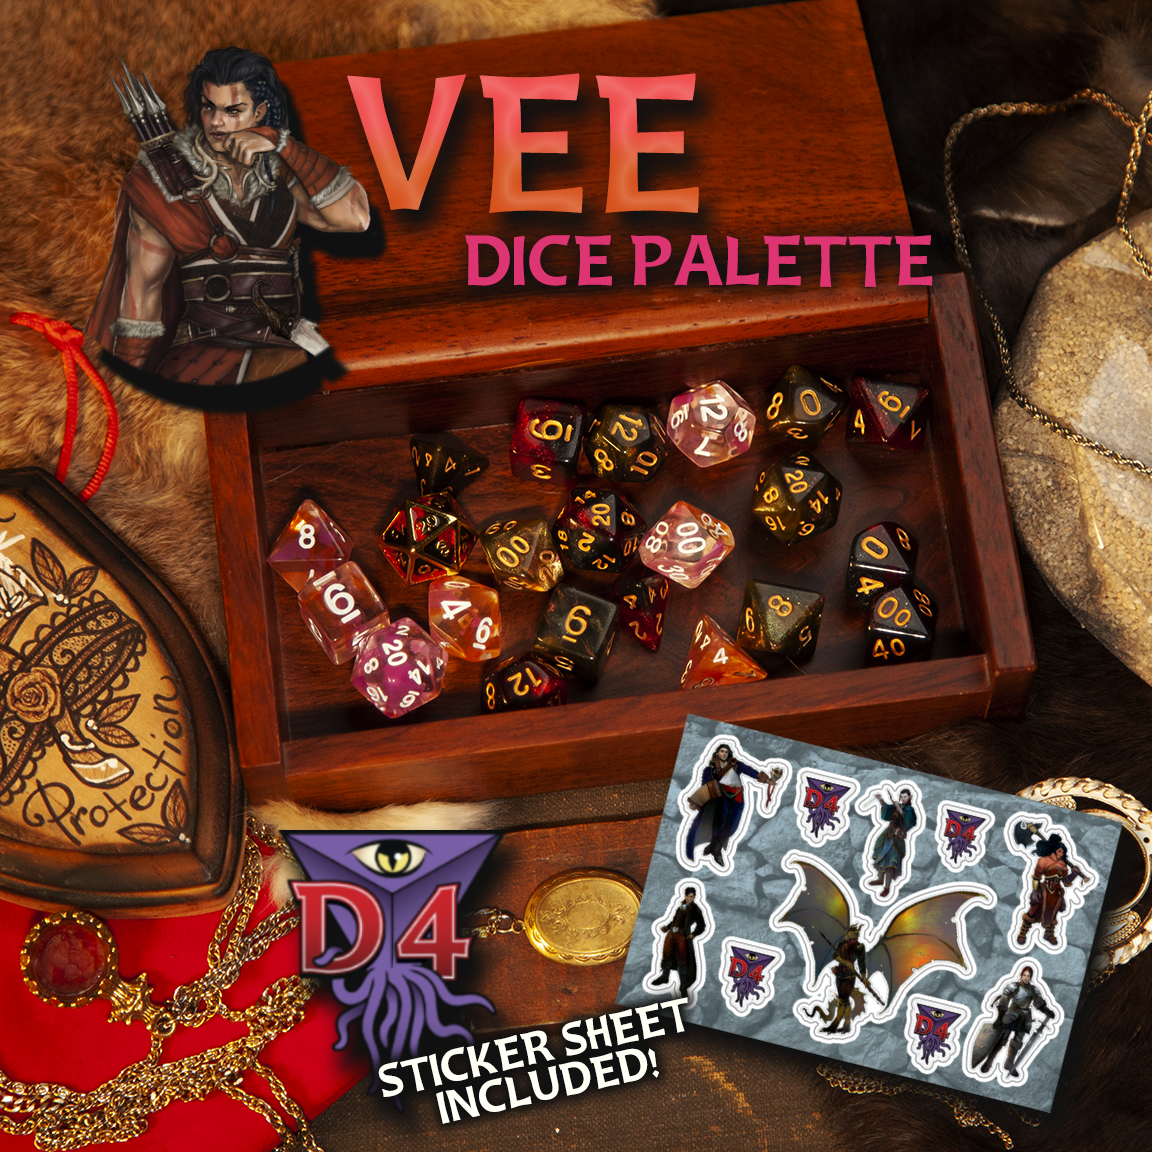 Vee Dice Palette from D4